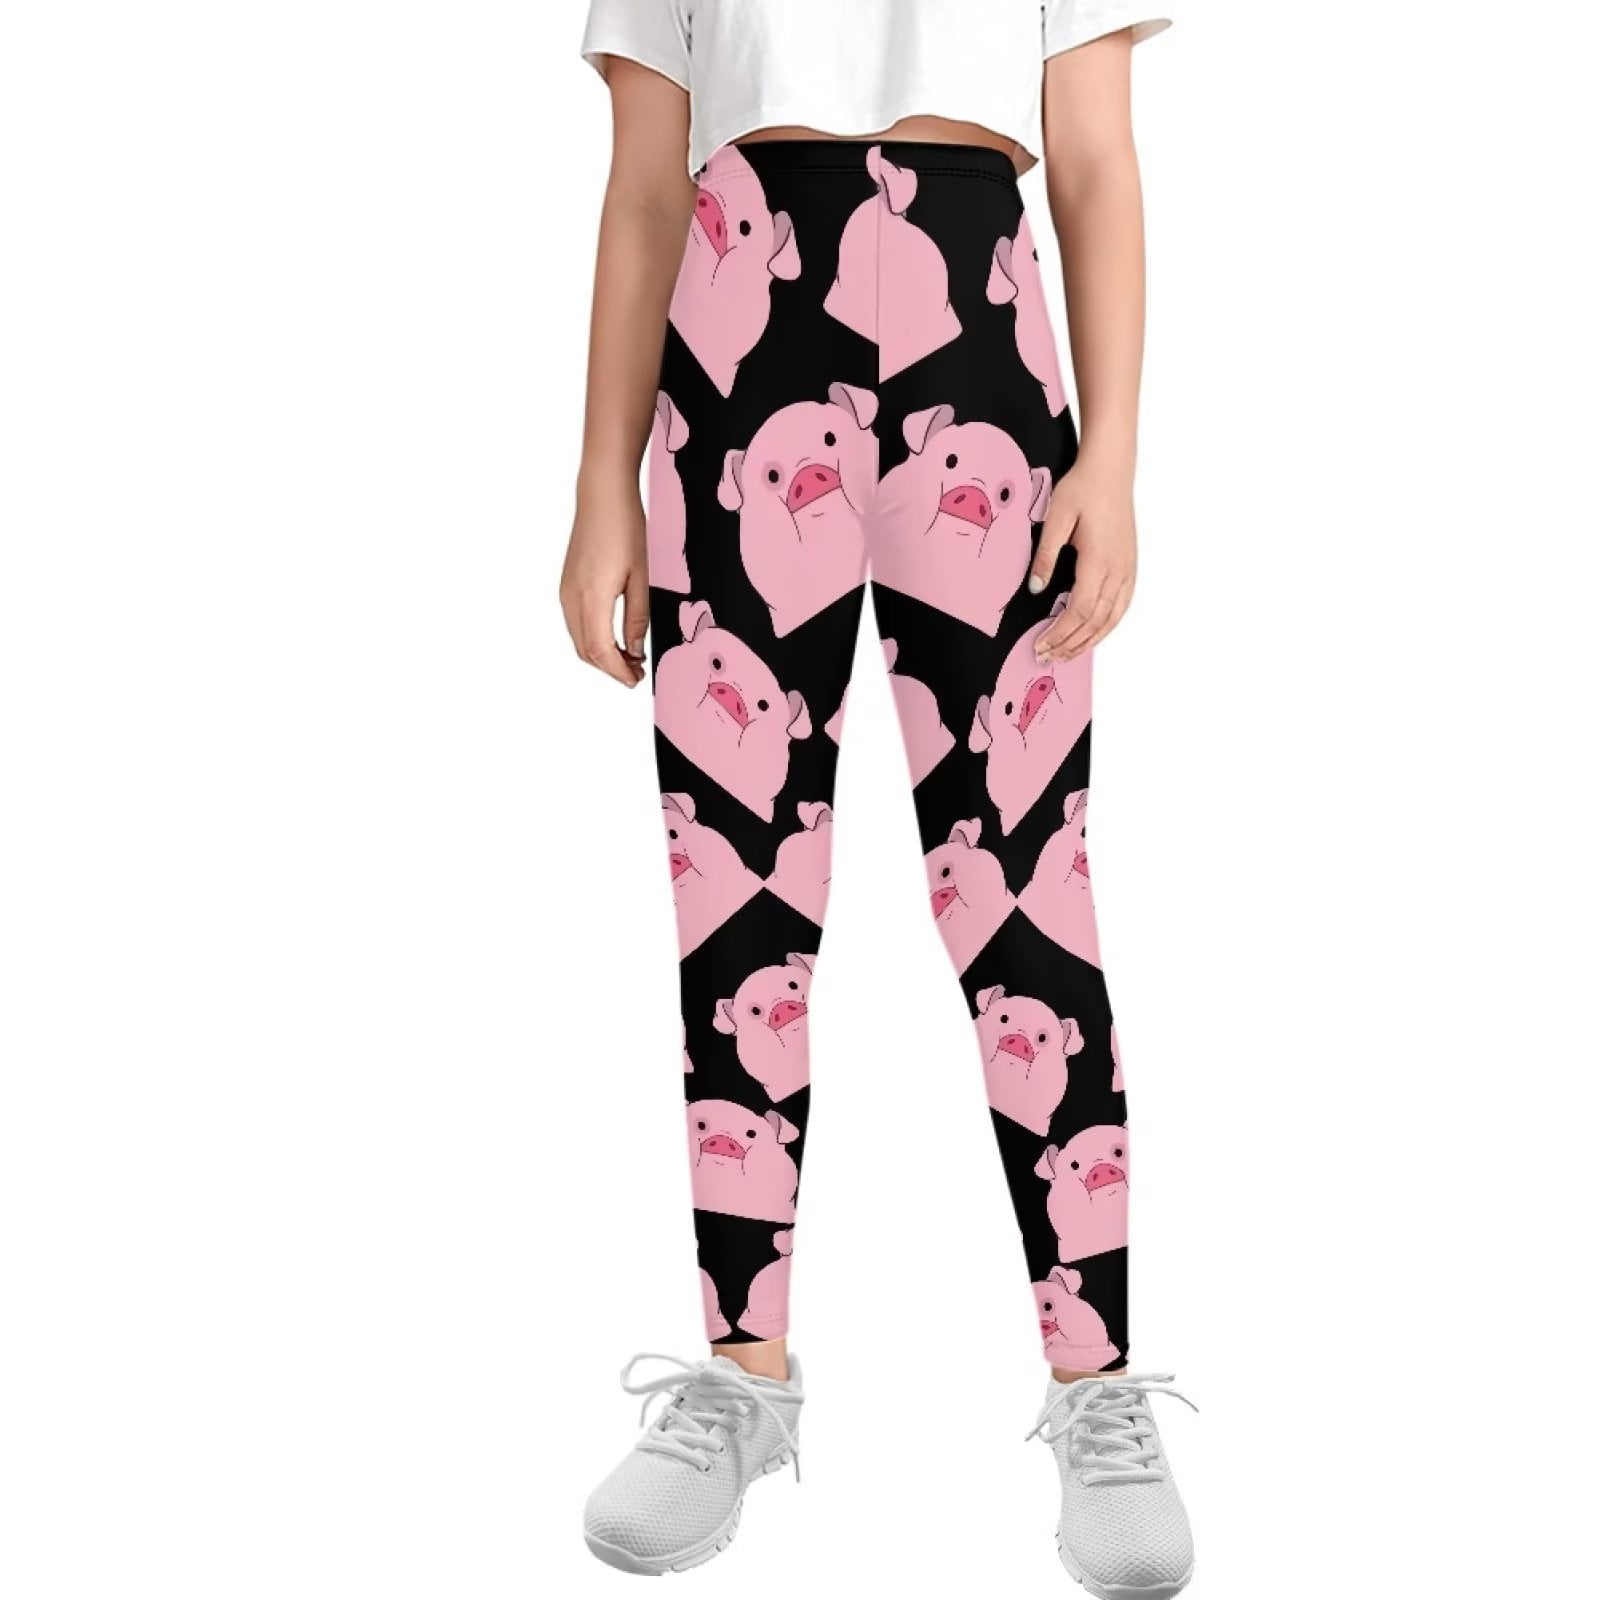 FKELYI Cow Print Cute Kids Leggings Size 10-11 Years Comfortable